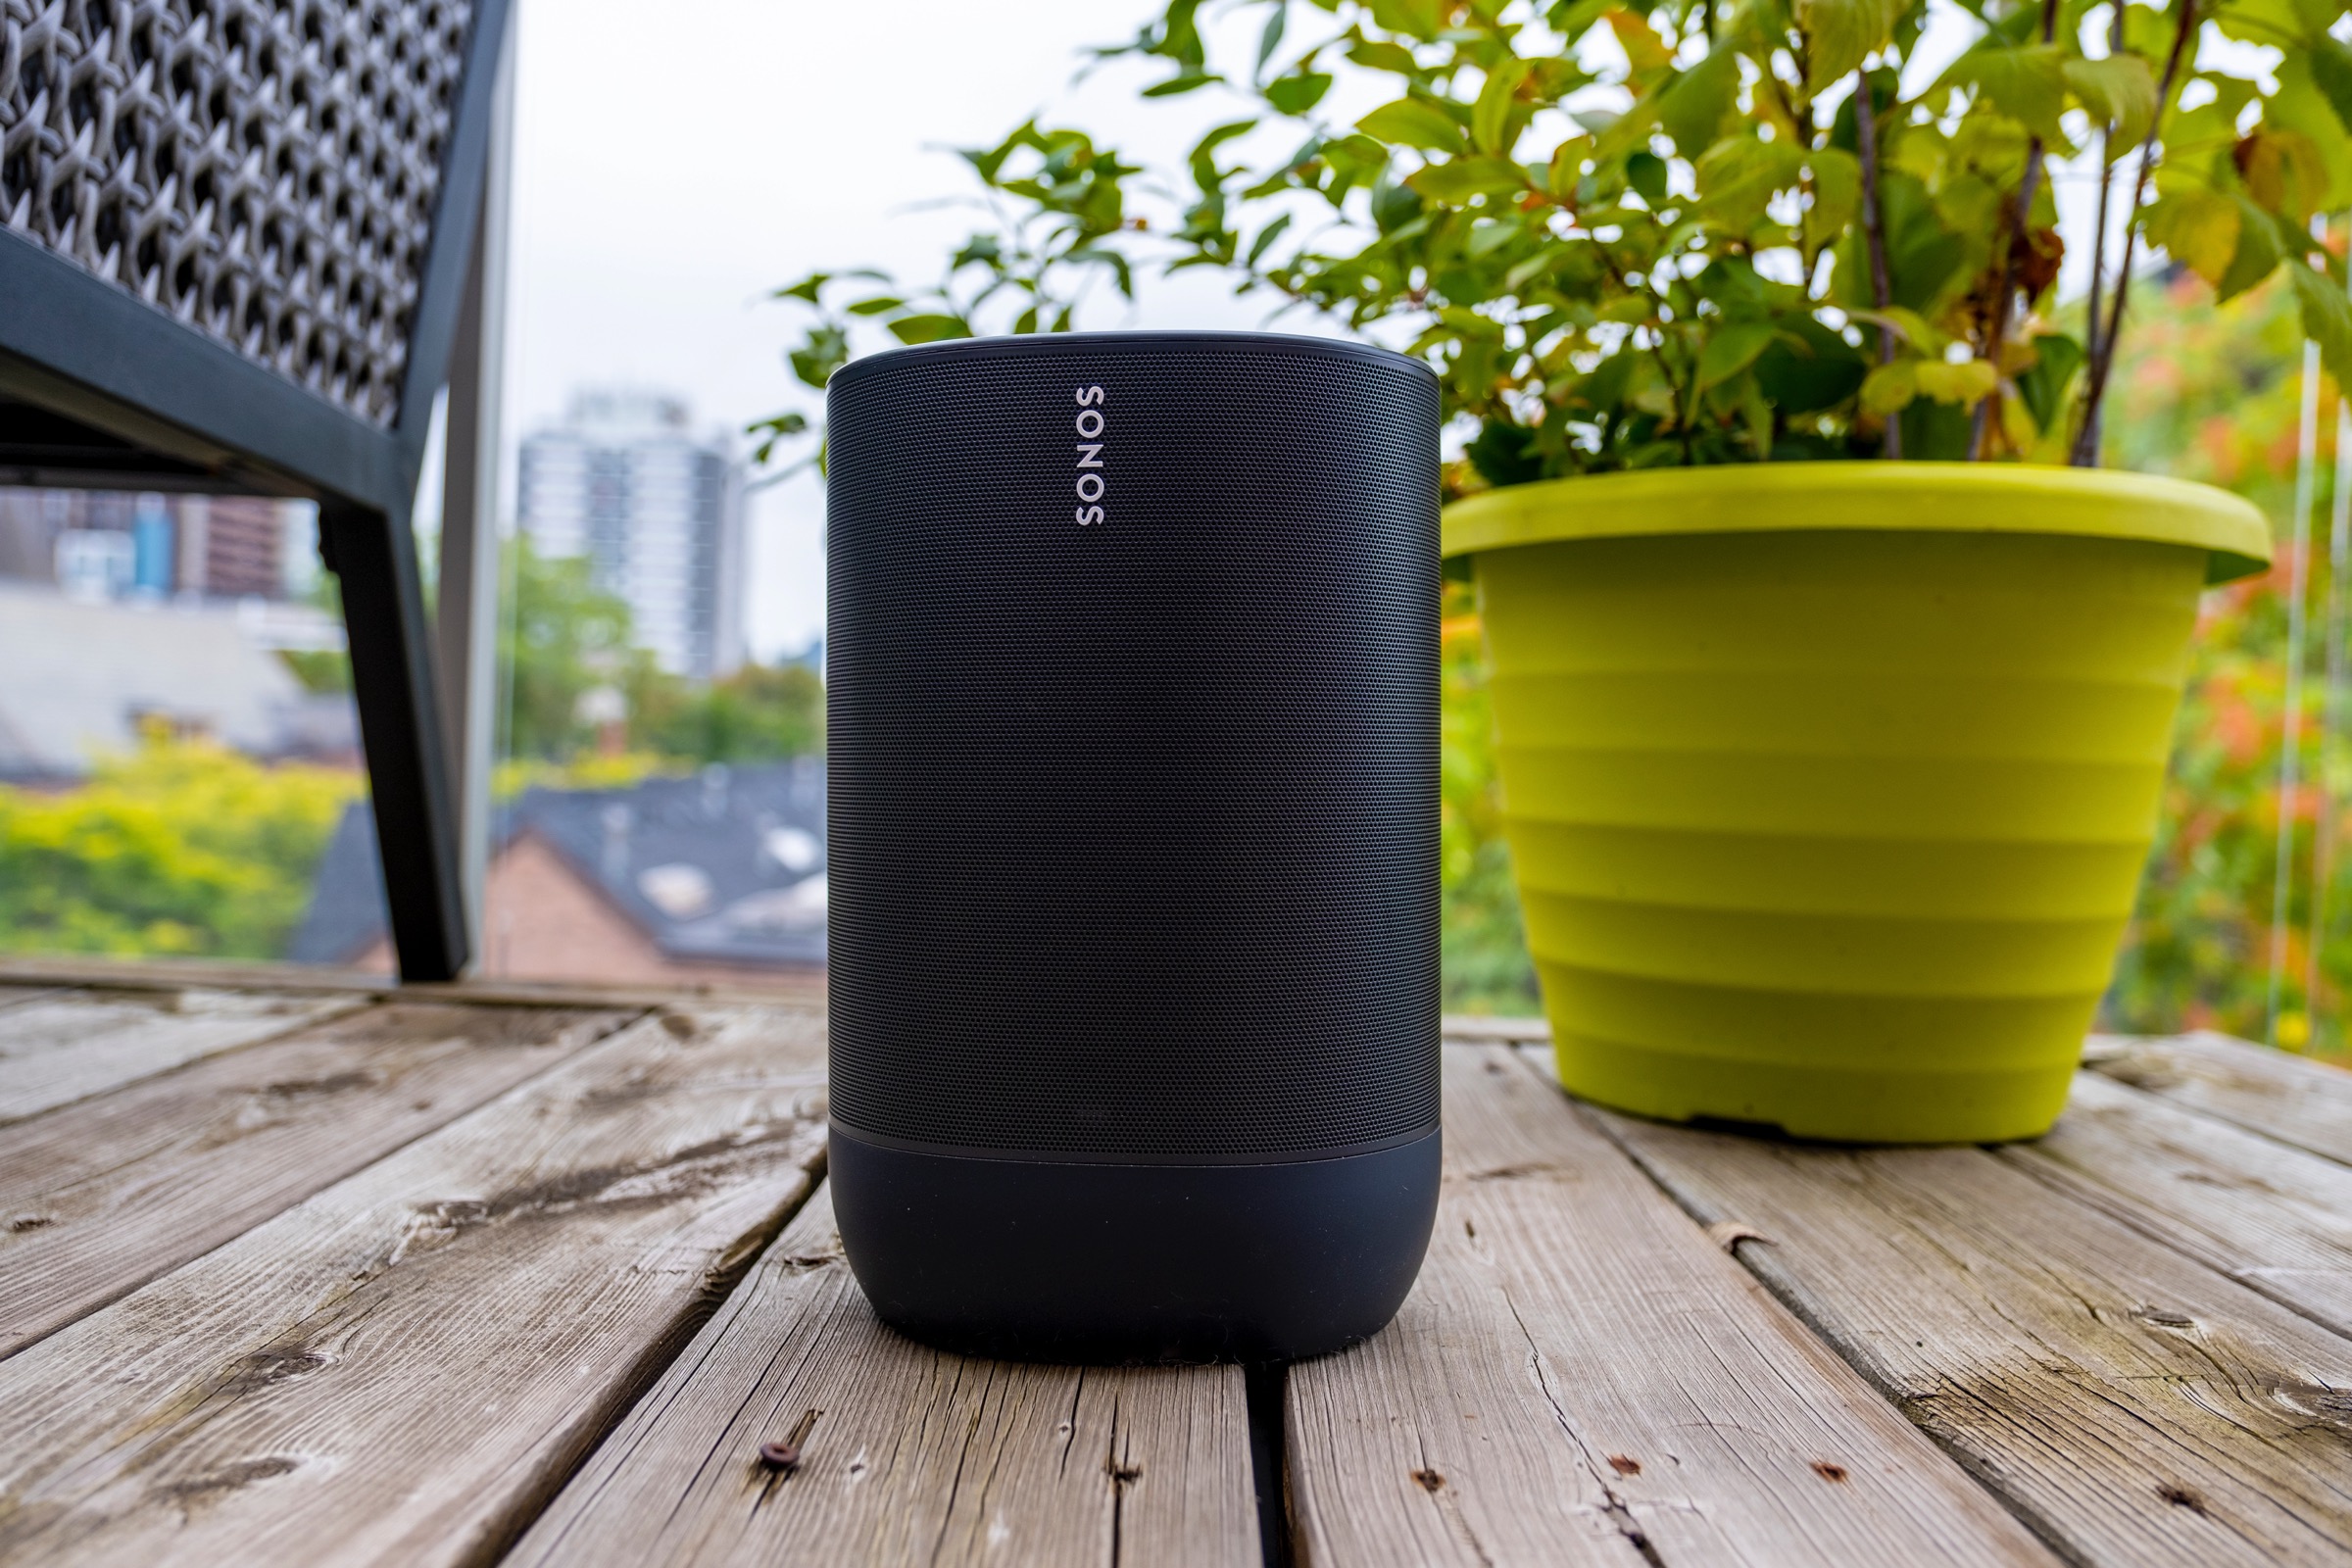 The portable $399 Sonos Move is having two great in one TechCrunch